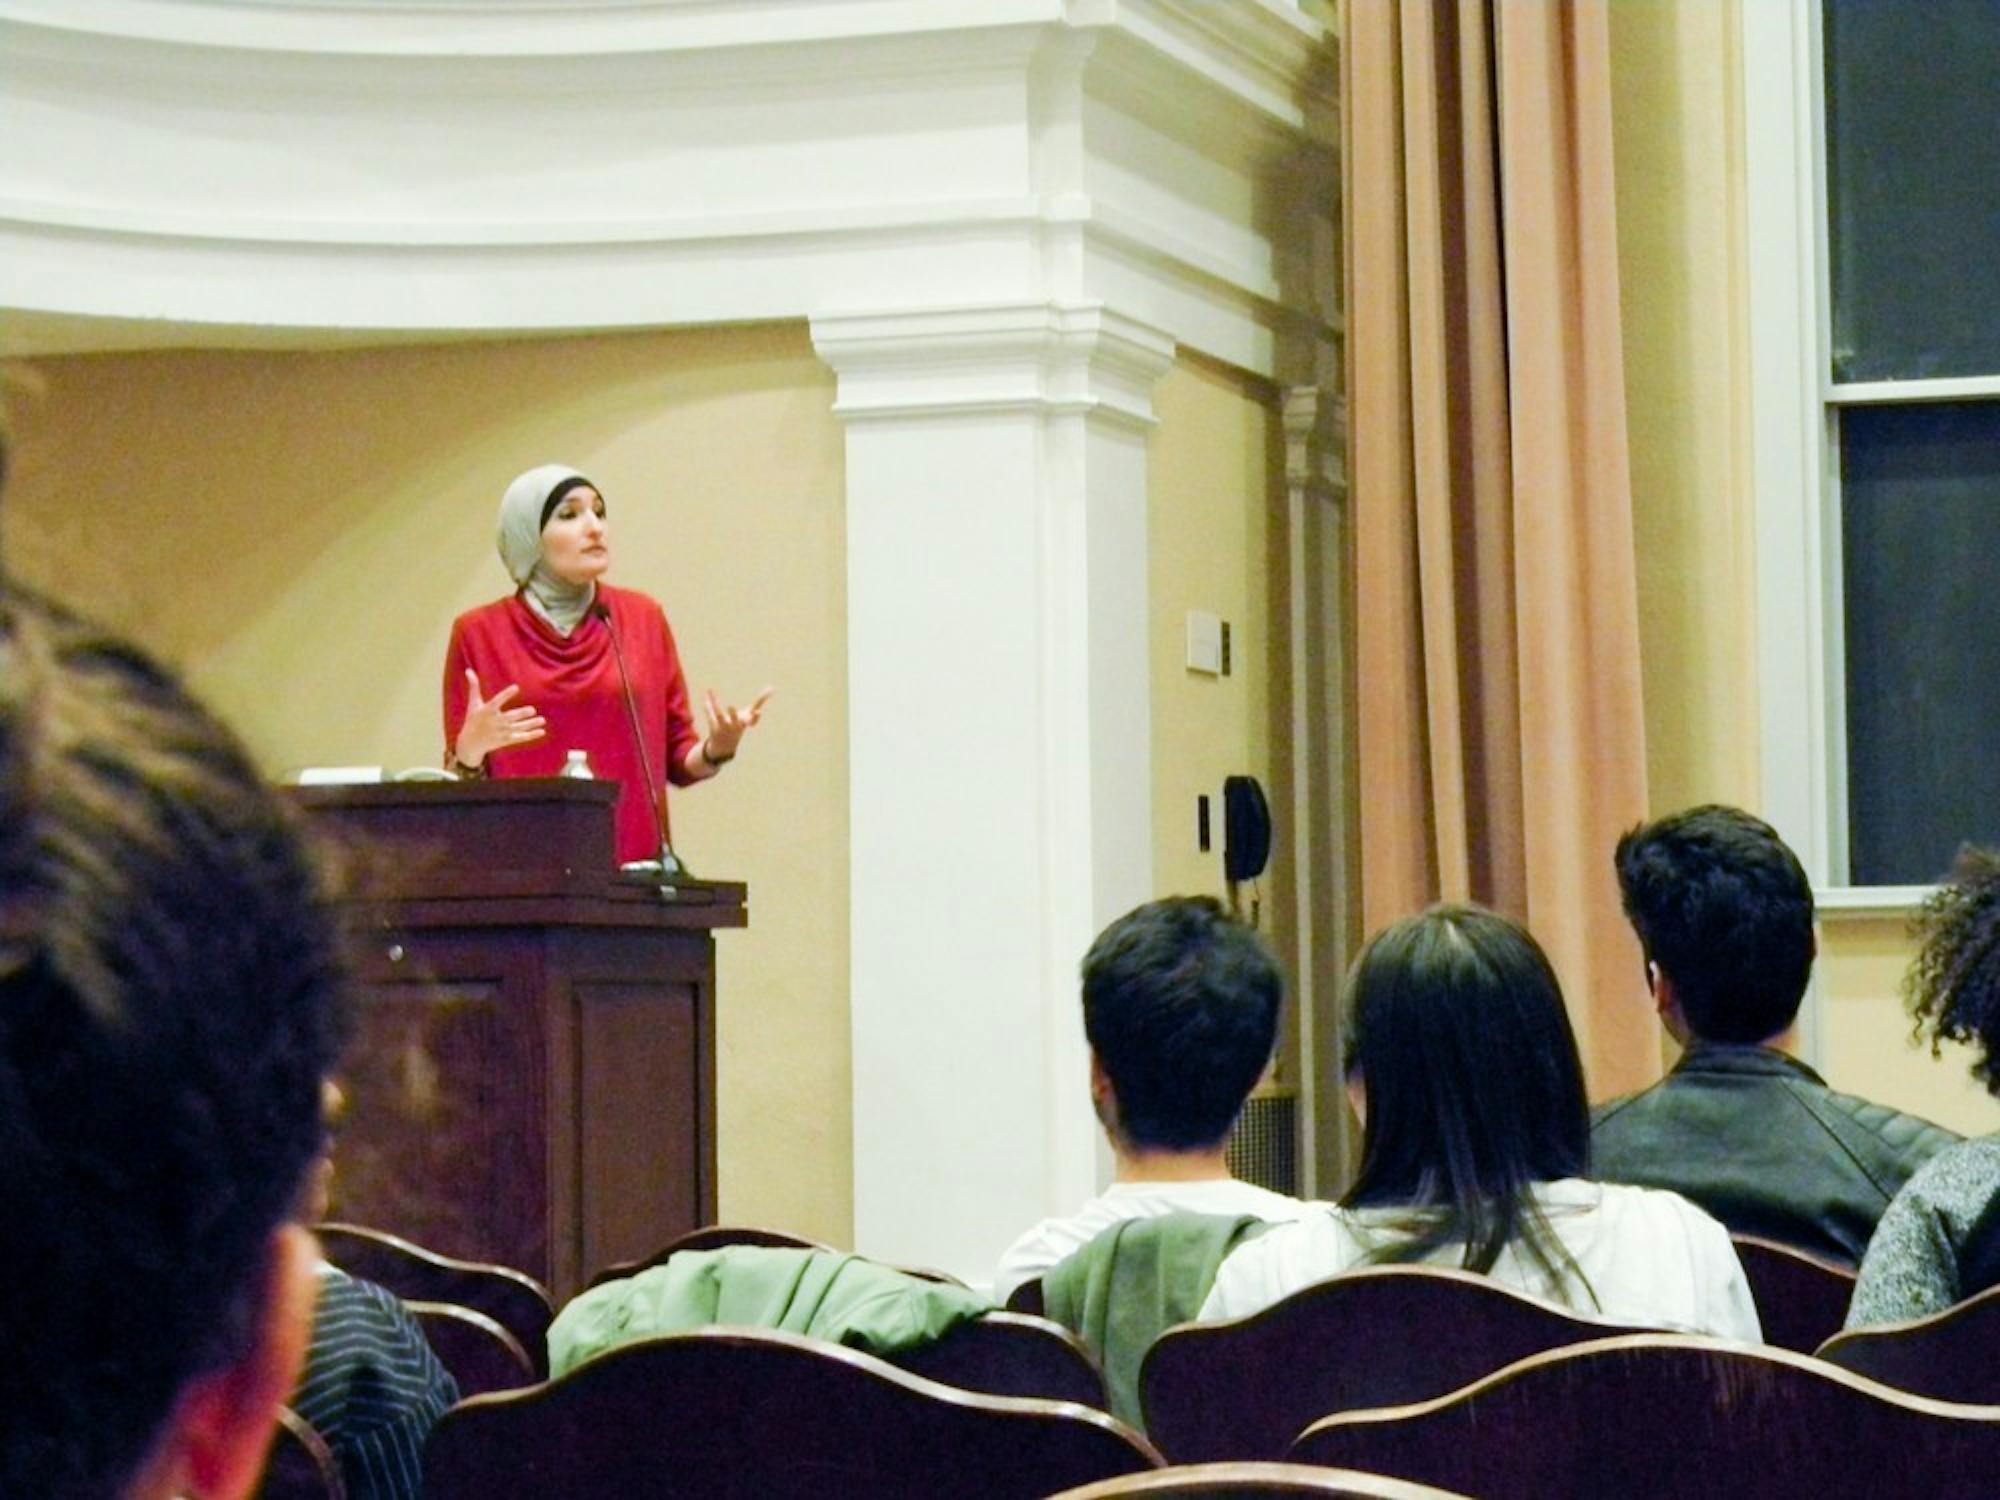 Palestinian-American activist Linda Sarsour gave a talk on Friday as part of APAHM.